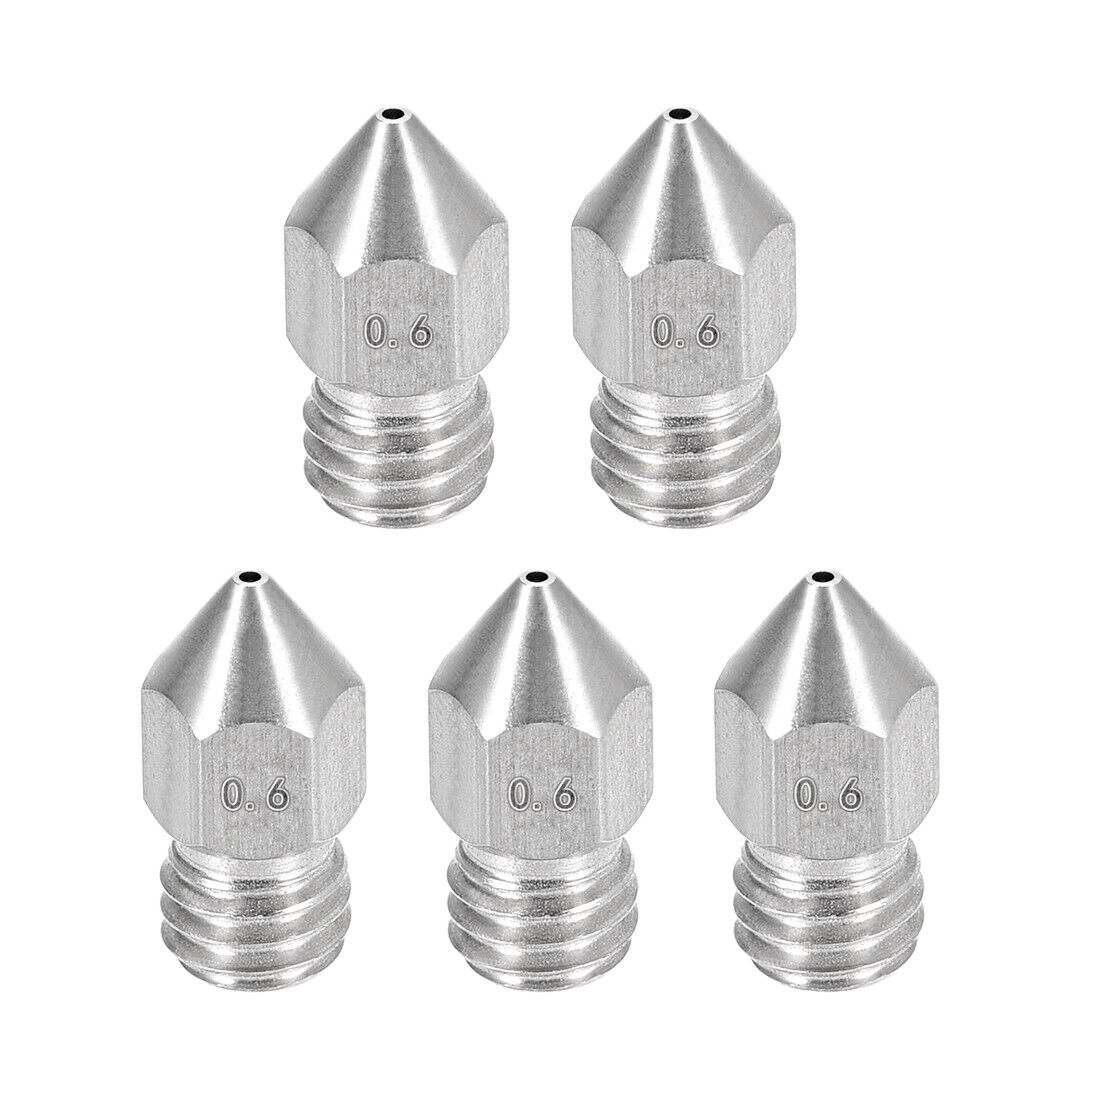 5pcs 3D Printer Nozzle Stainless Steel 0.6mm Fit for MK8 for 1.75mm Filament 